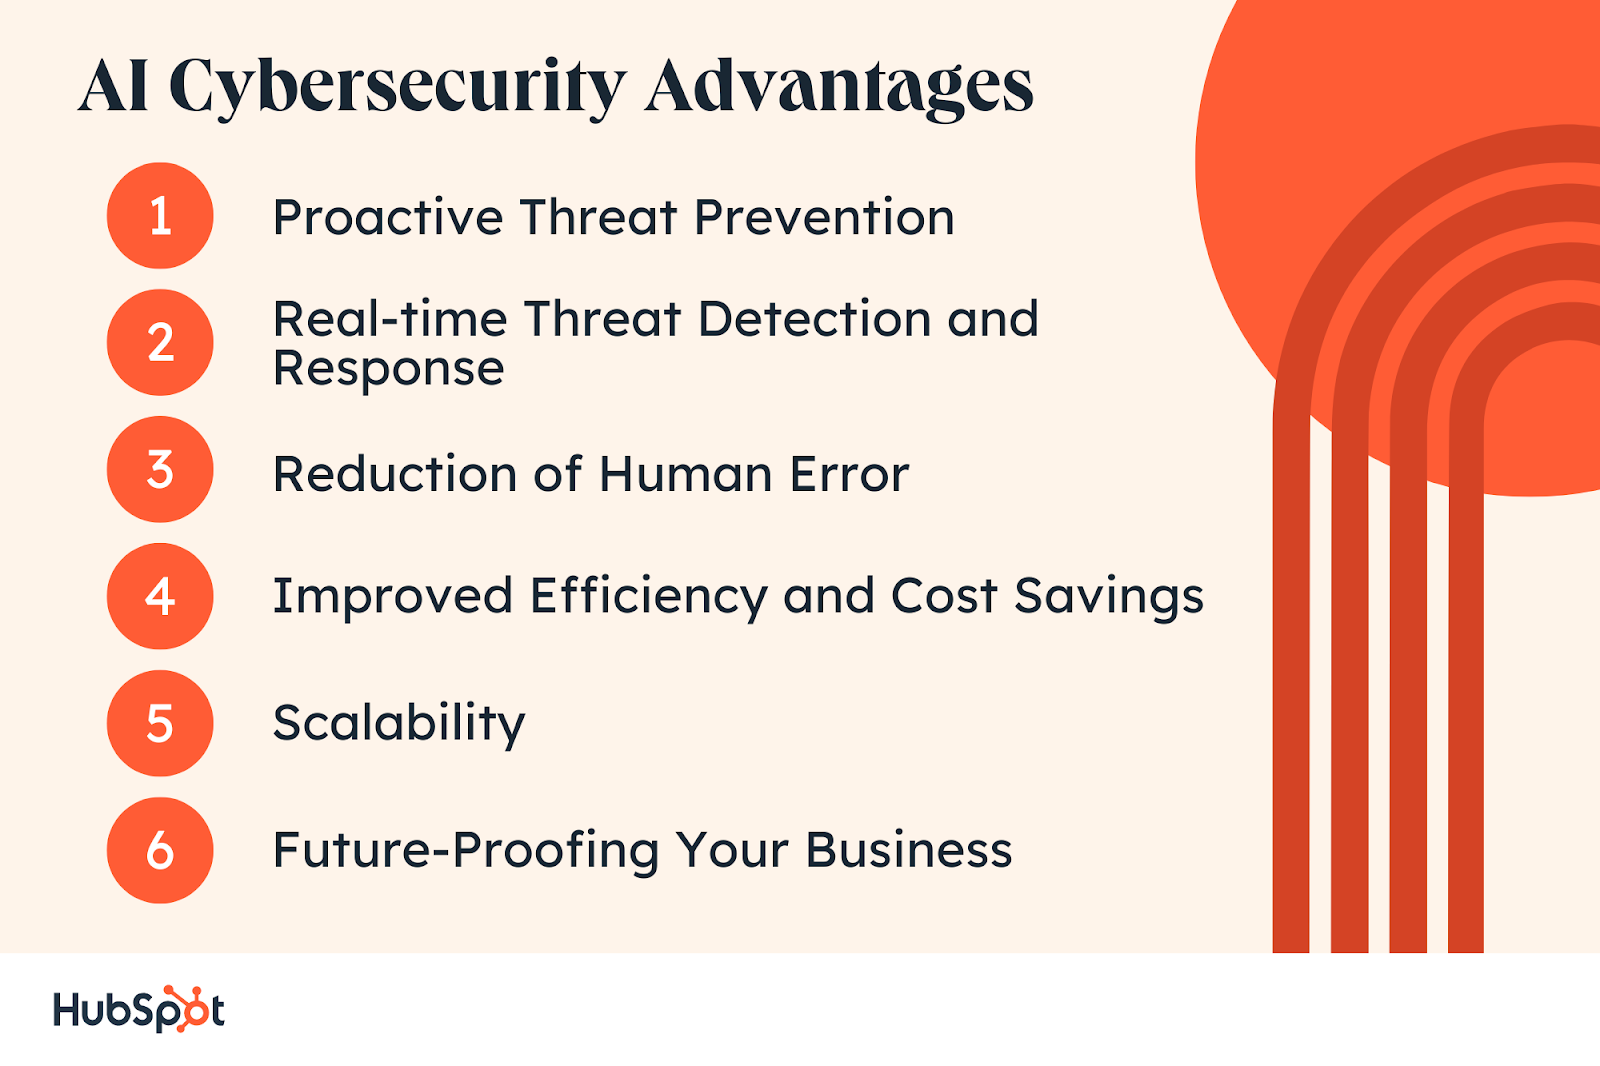 AI Cybersecurity Advantages. Proactive Threat Prevention. AI Cybersecurity Advantages. Real-time Threat Detection and Response. Reduction of Human Error. Improved Efficiency and Cost Savings. Scalability. Future-Proofing Your Business